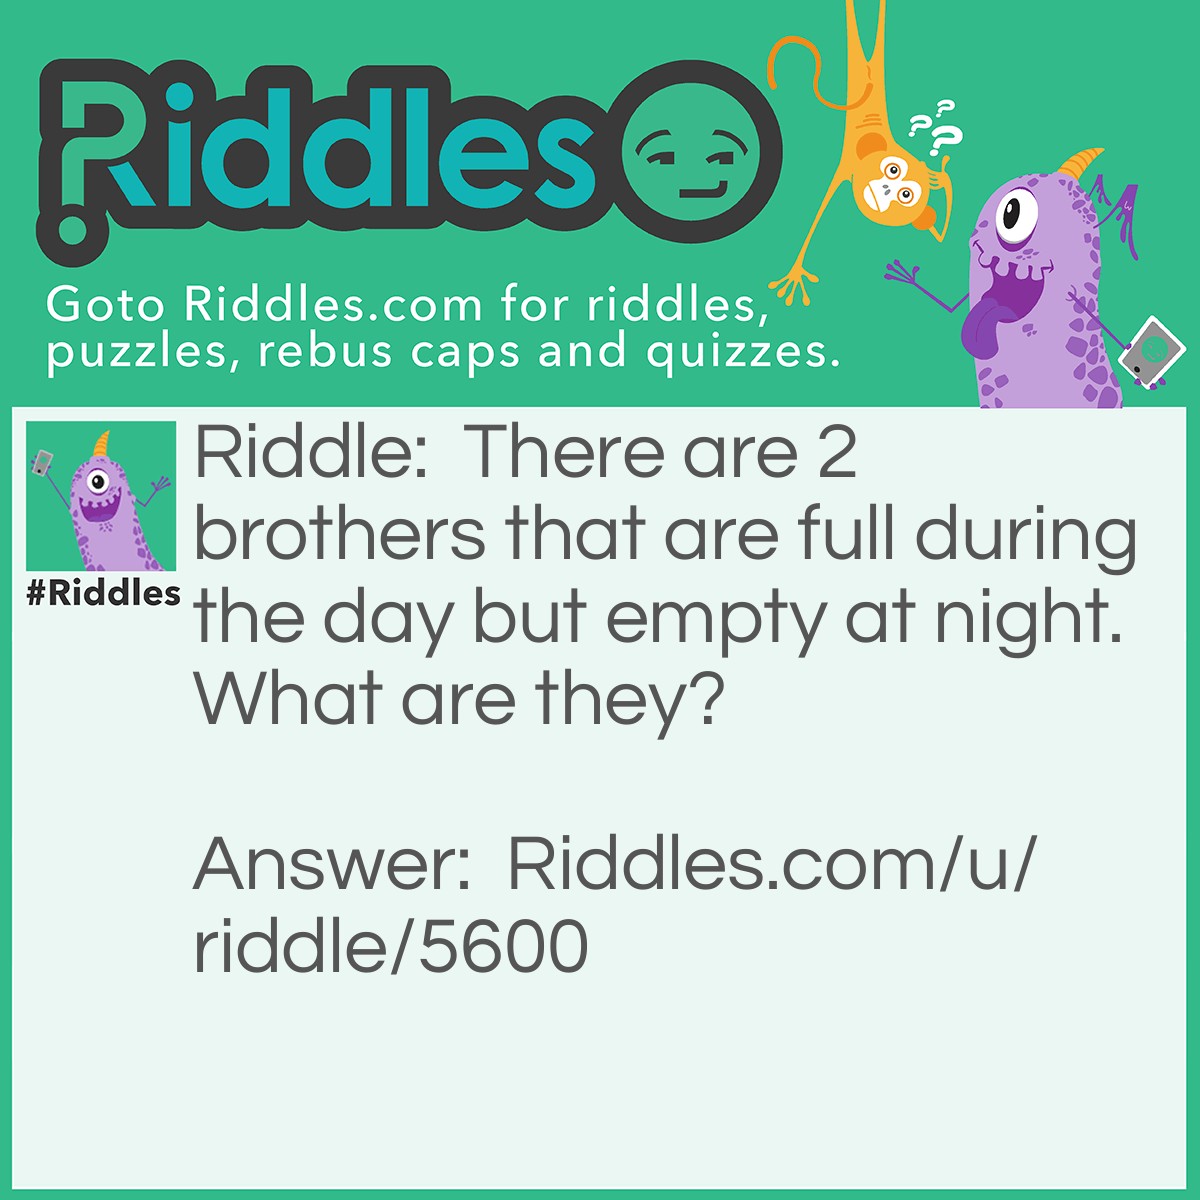 Riddle: There are 2 brothers that are full during the day but empty at night. What are they? Answer: A pair of shoes.